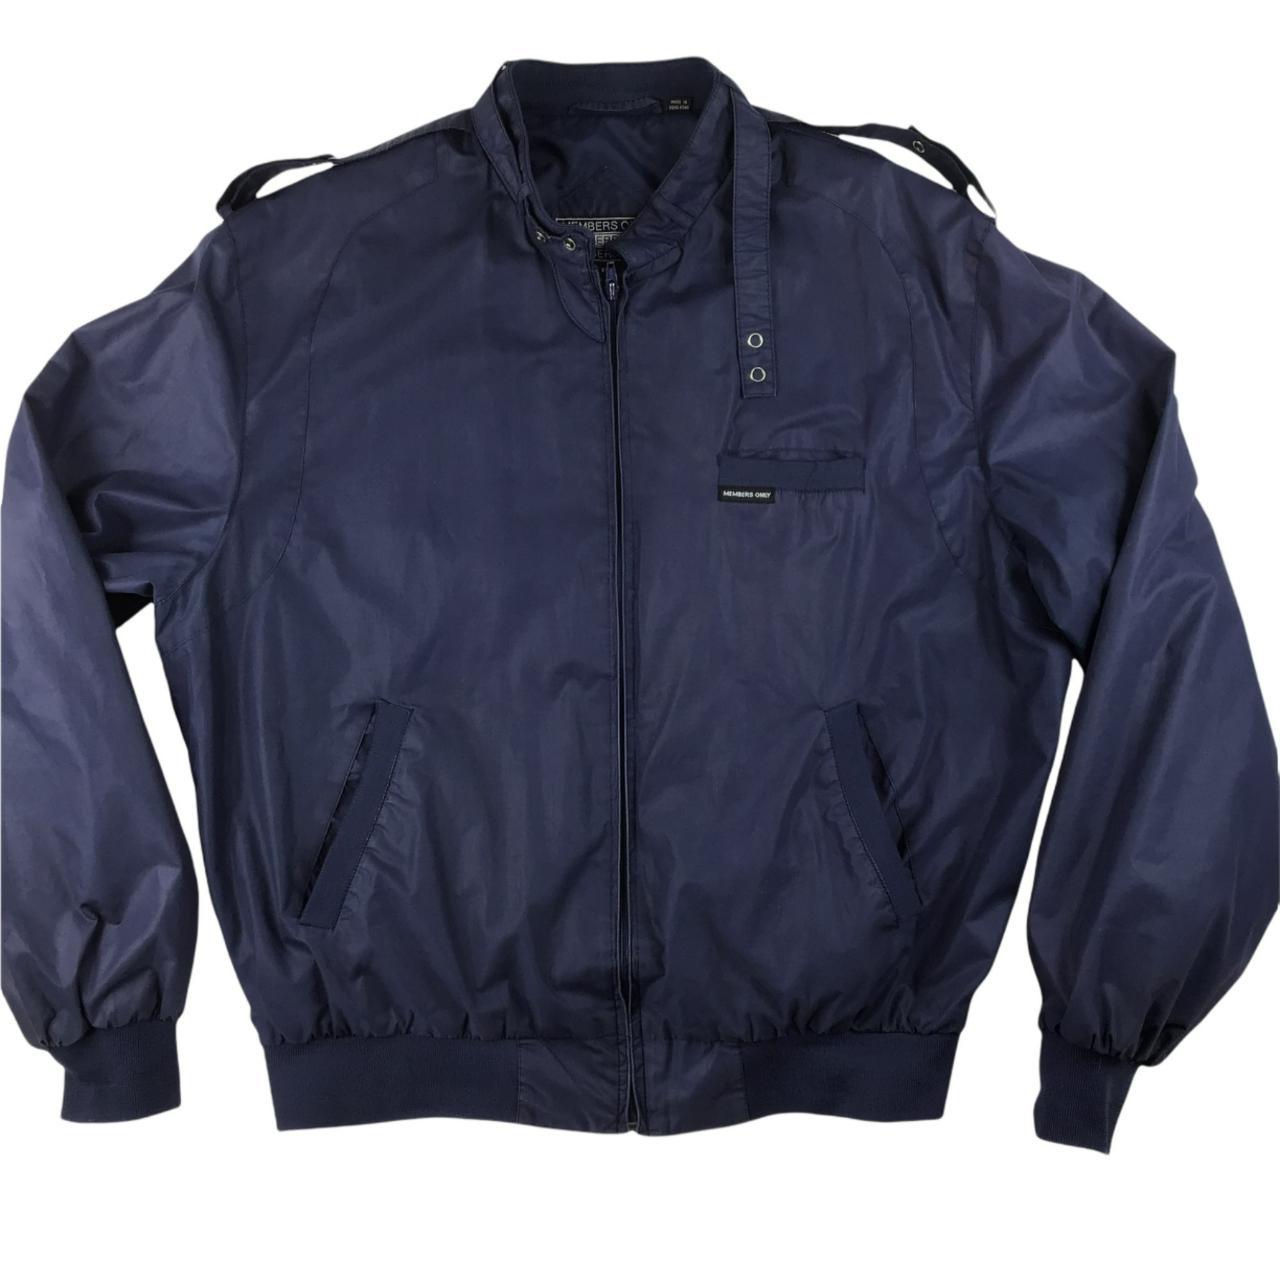 Product Image 1 - Vintage Members only mens jacket